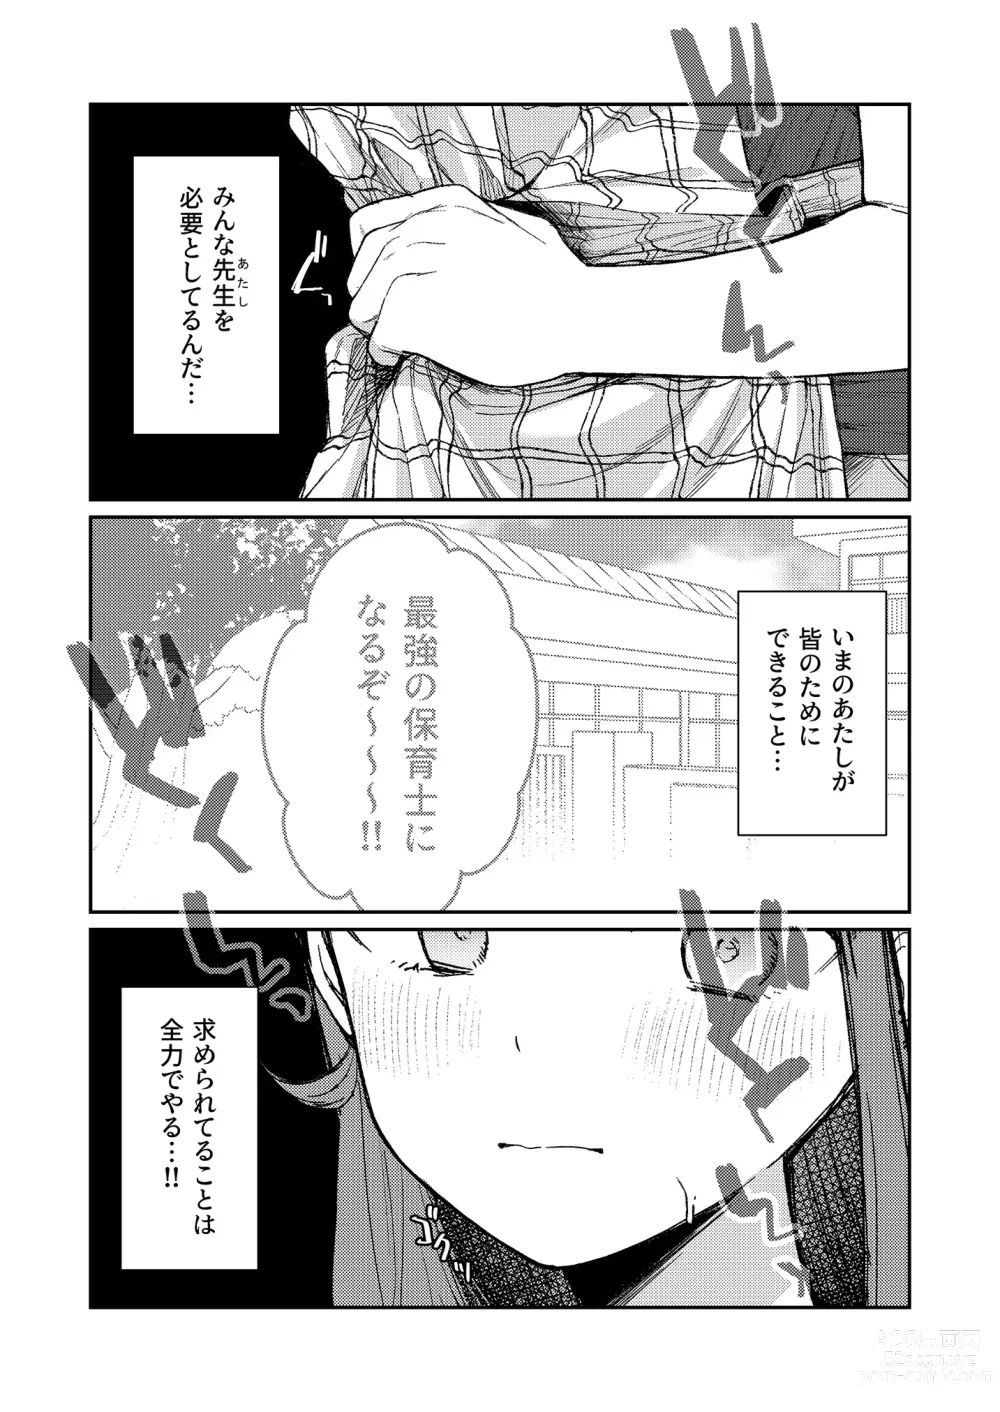 Page 10 of doujinshi Ageha tente to issho